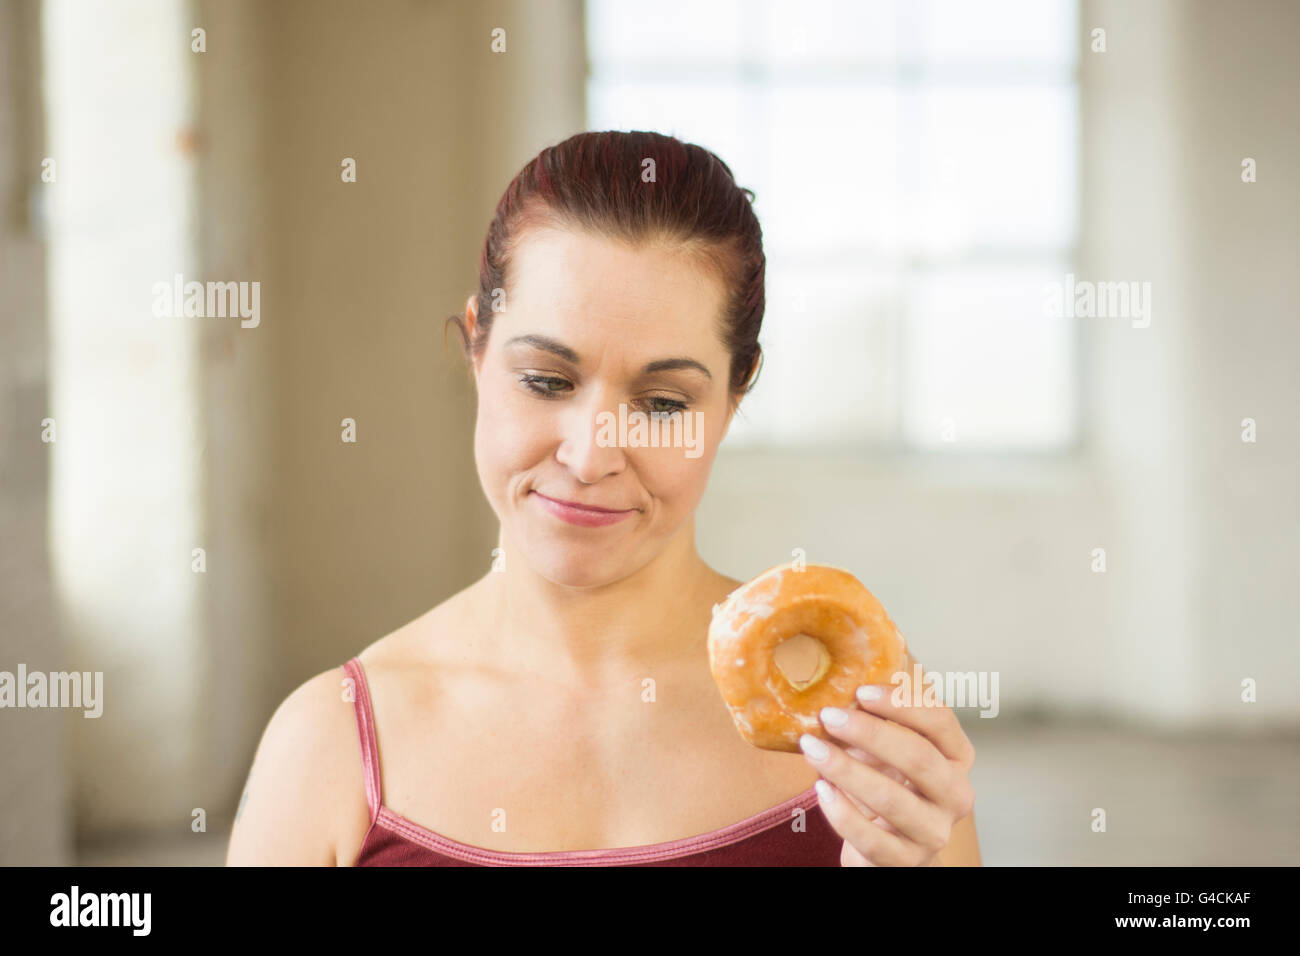 Woman feeling guilty eating donuts Stock Photo